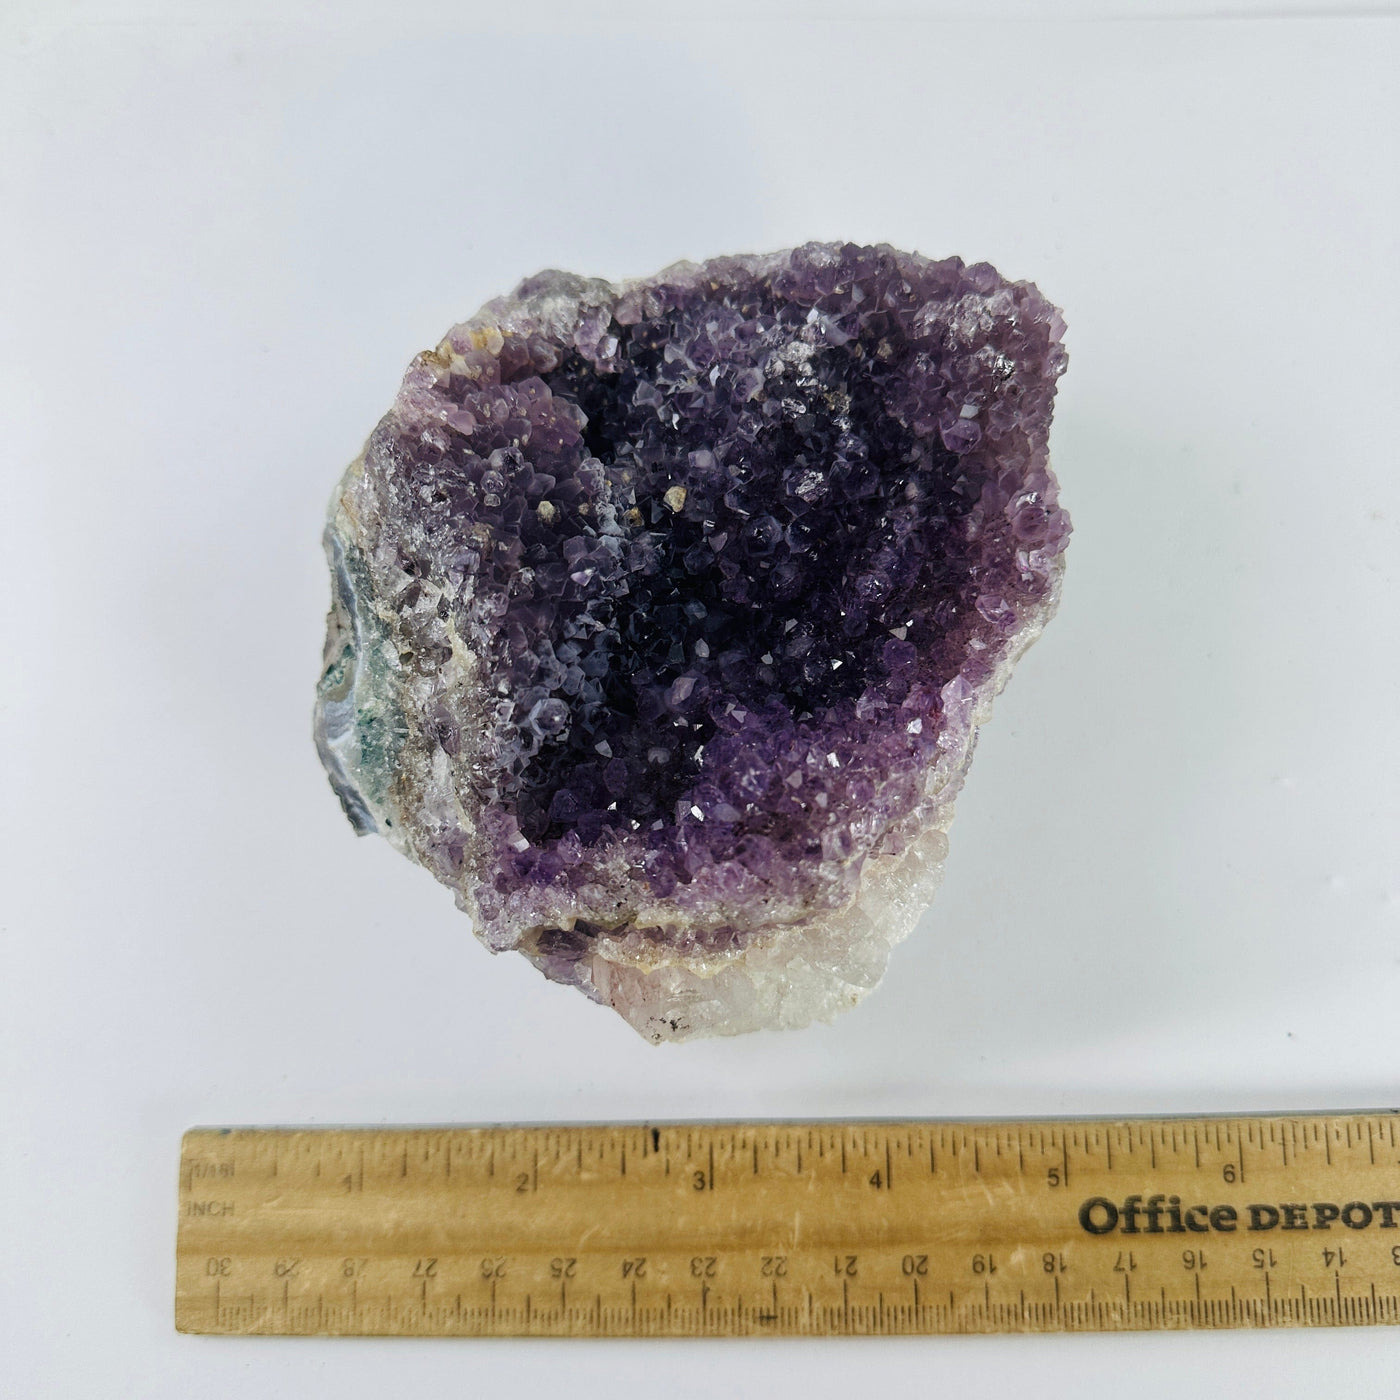 Amethyst Crystal Cluster - natural amethyst top view with ruler for size reference